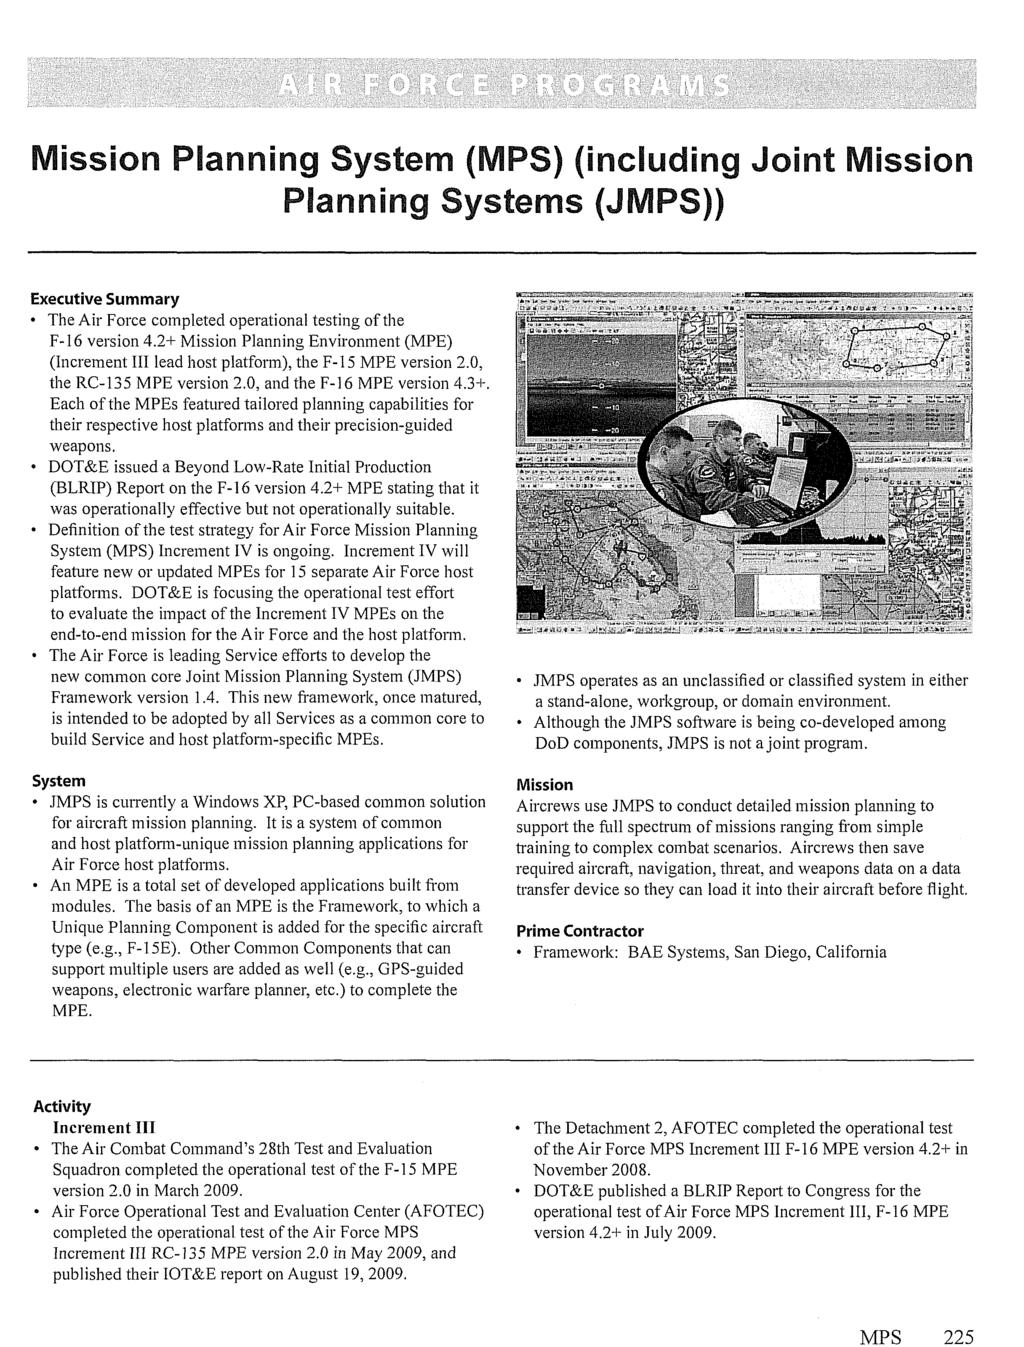 MPS 225 Mission Planning System (MPS) (including Joint Mission Planning Systems (JMPS)) Executive Summary The Air Force completed operational testing of the F-16 version 4.